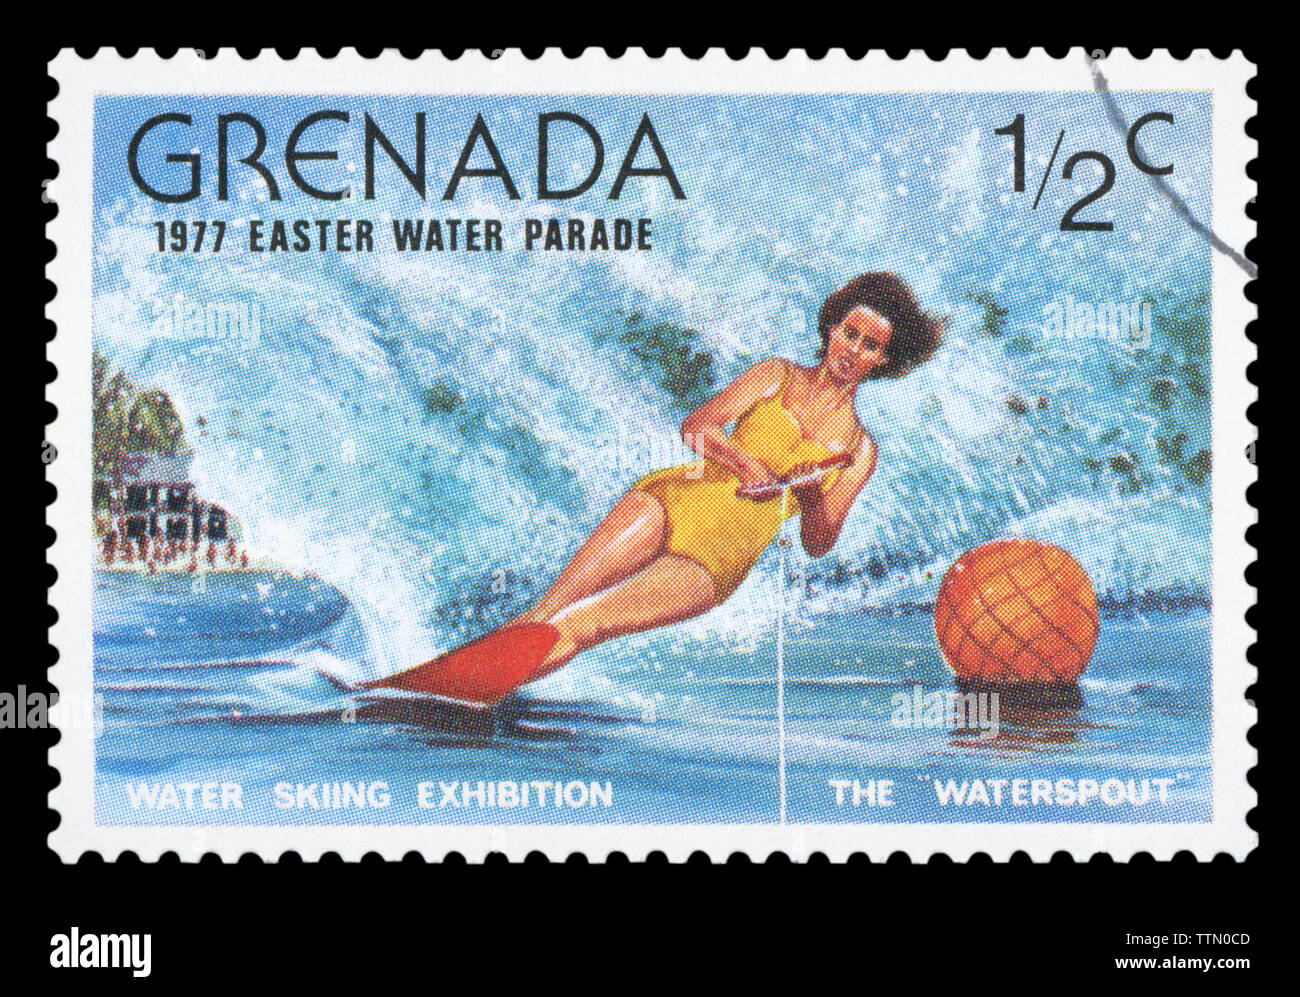 GRENADA - CIRCA 1977: A stamp printed in Grenada issued for the easter water parade shows skiing exhibition, circa 1977. Stock Photo